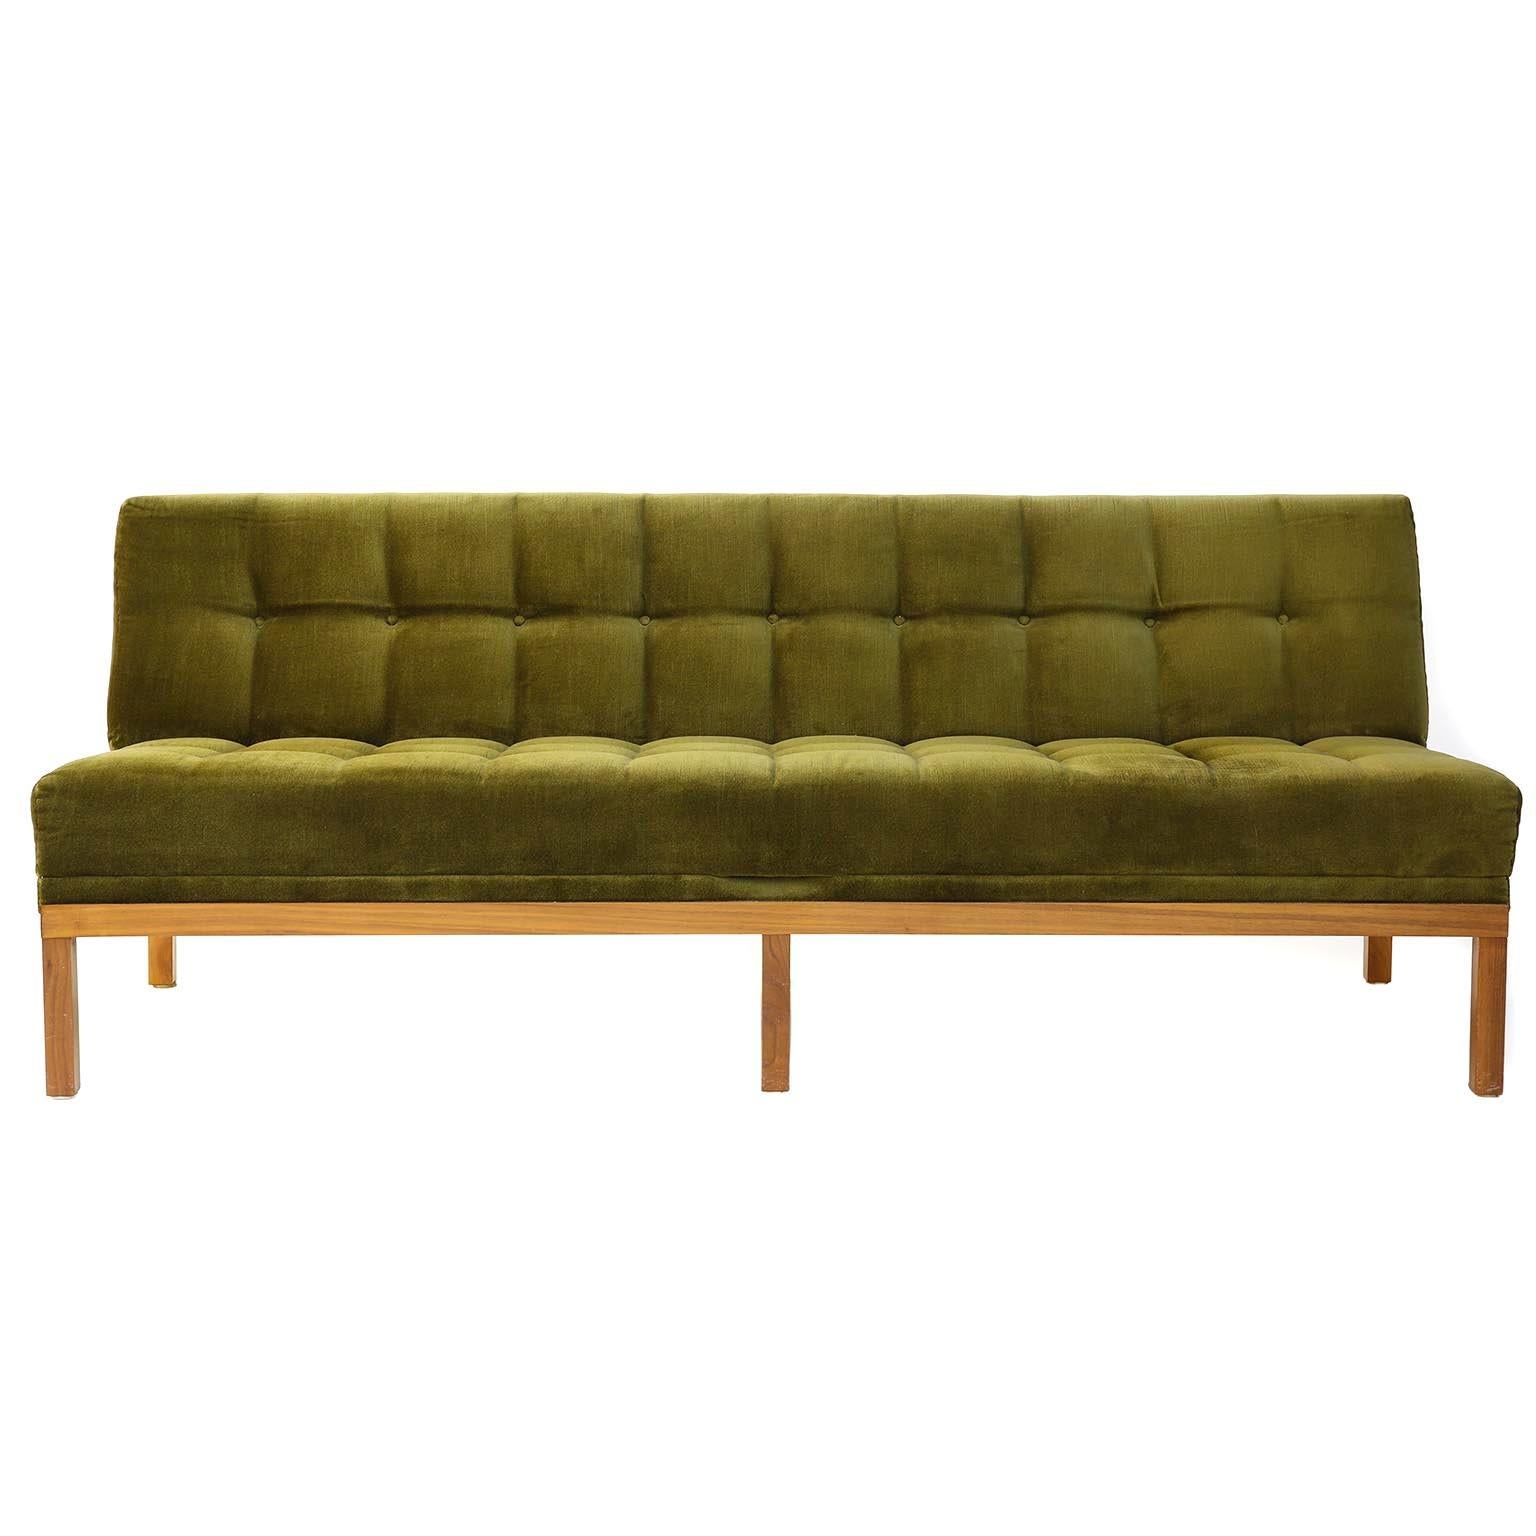 A freestanding tufted sofa named 'Constanze' (engl. Constance) designed by Prof. Johannes Spalt for Wittmann, Austria, manufacured in midcentury. By one hand movement the 'Constanze' changes from a sofa to a daybed. 
Johannes Spalt designed this